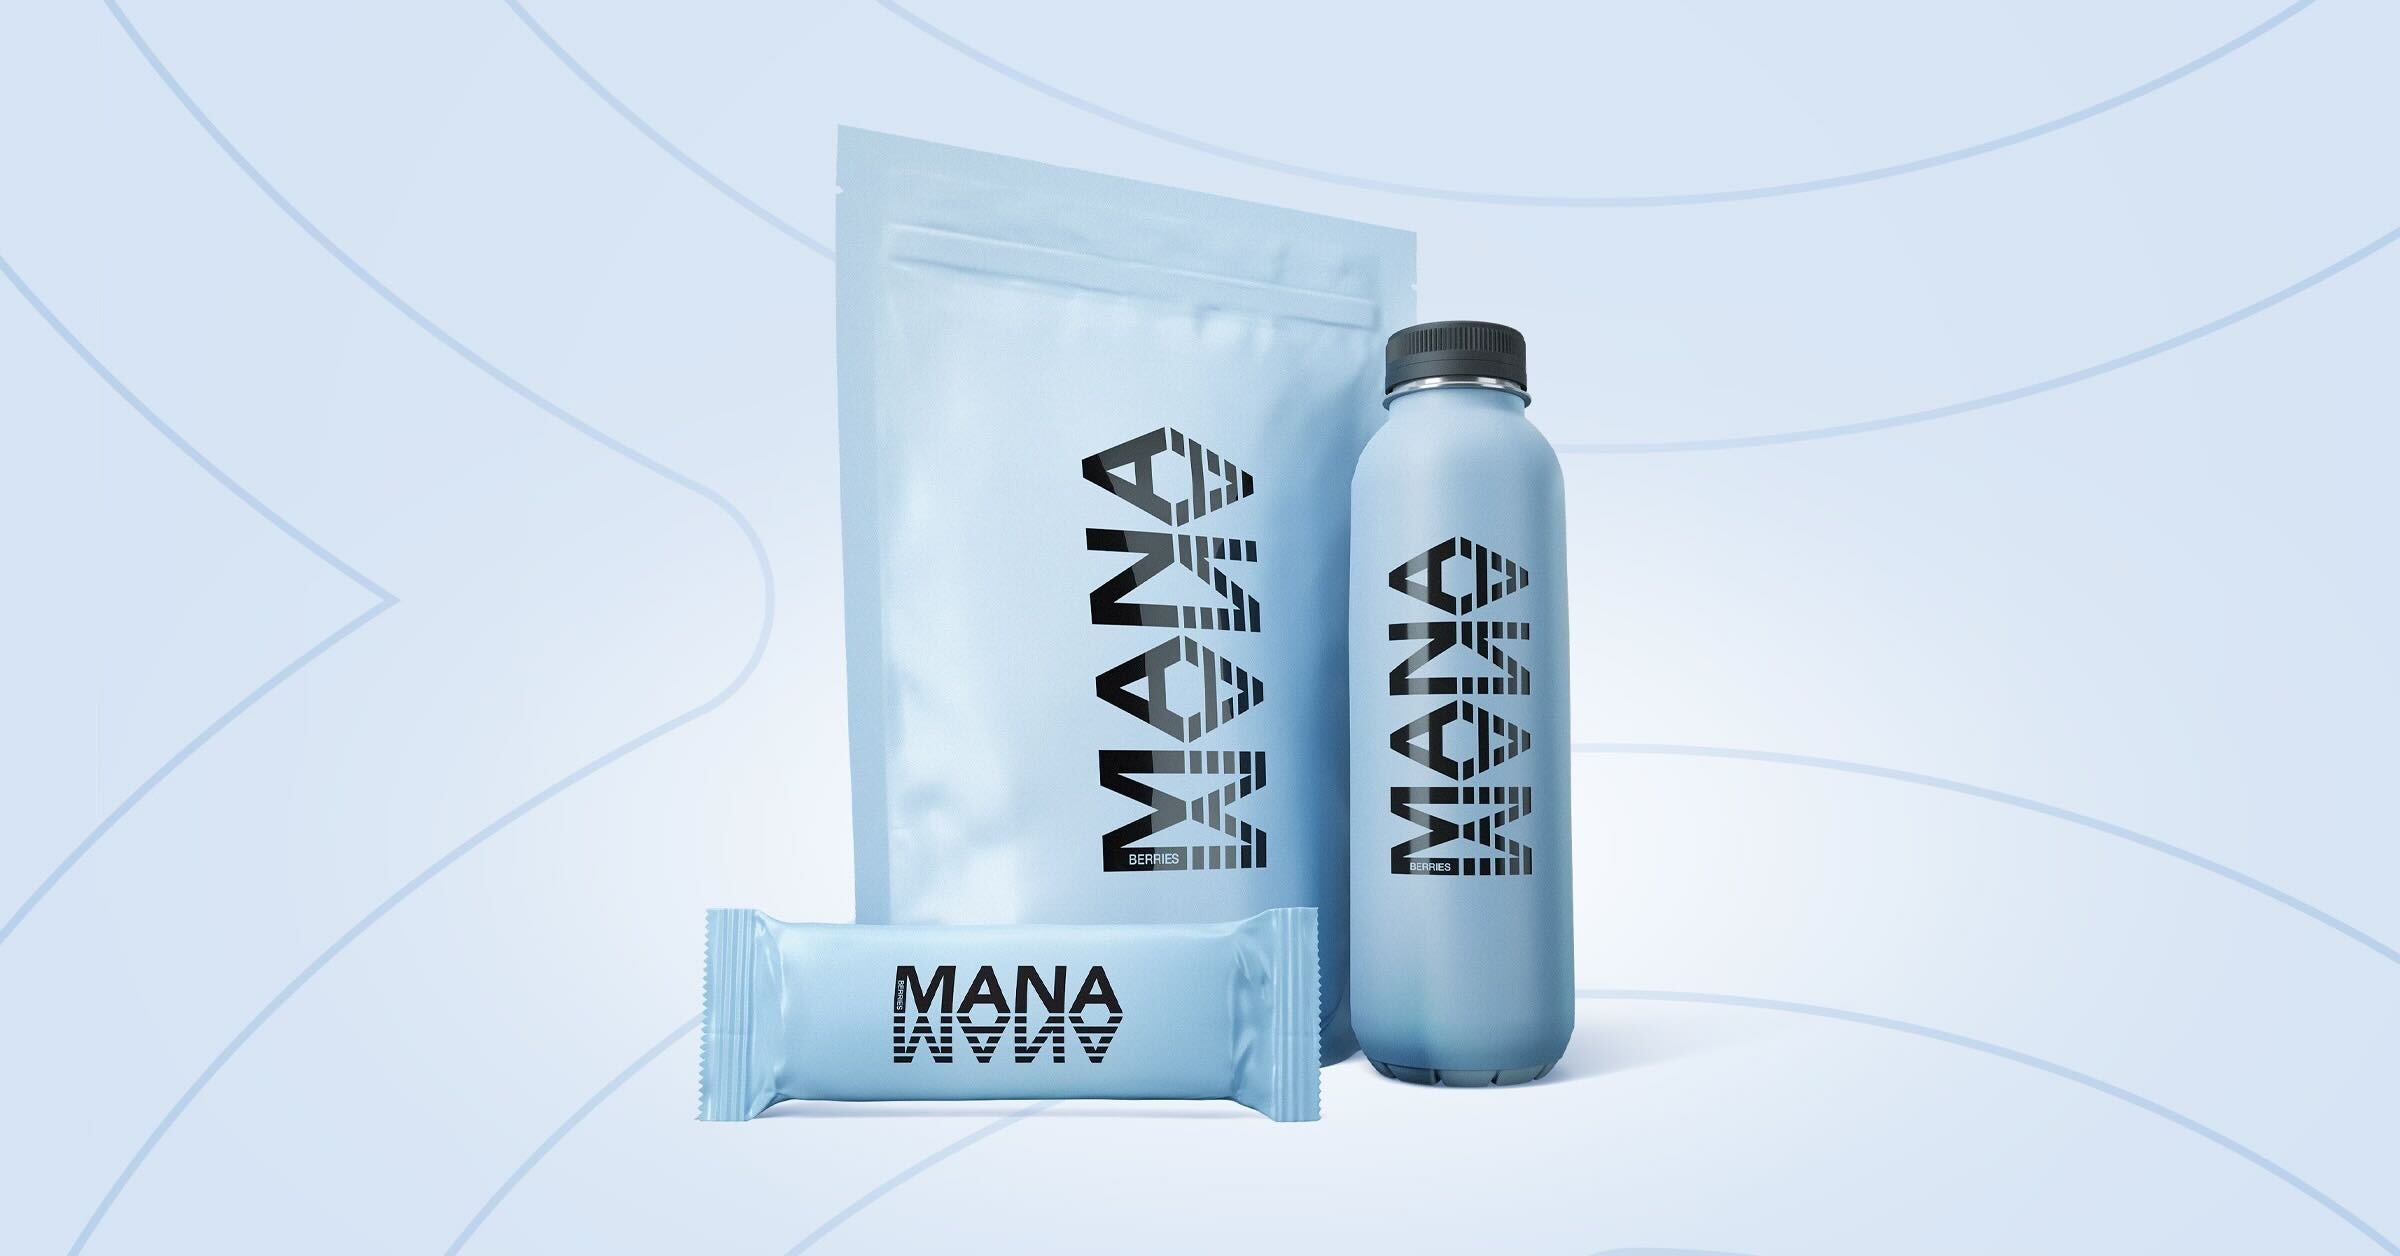 The new Mana Berries is here.